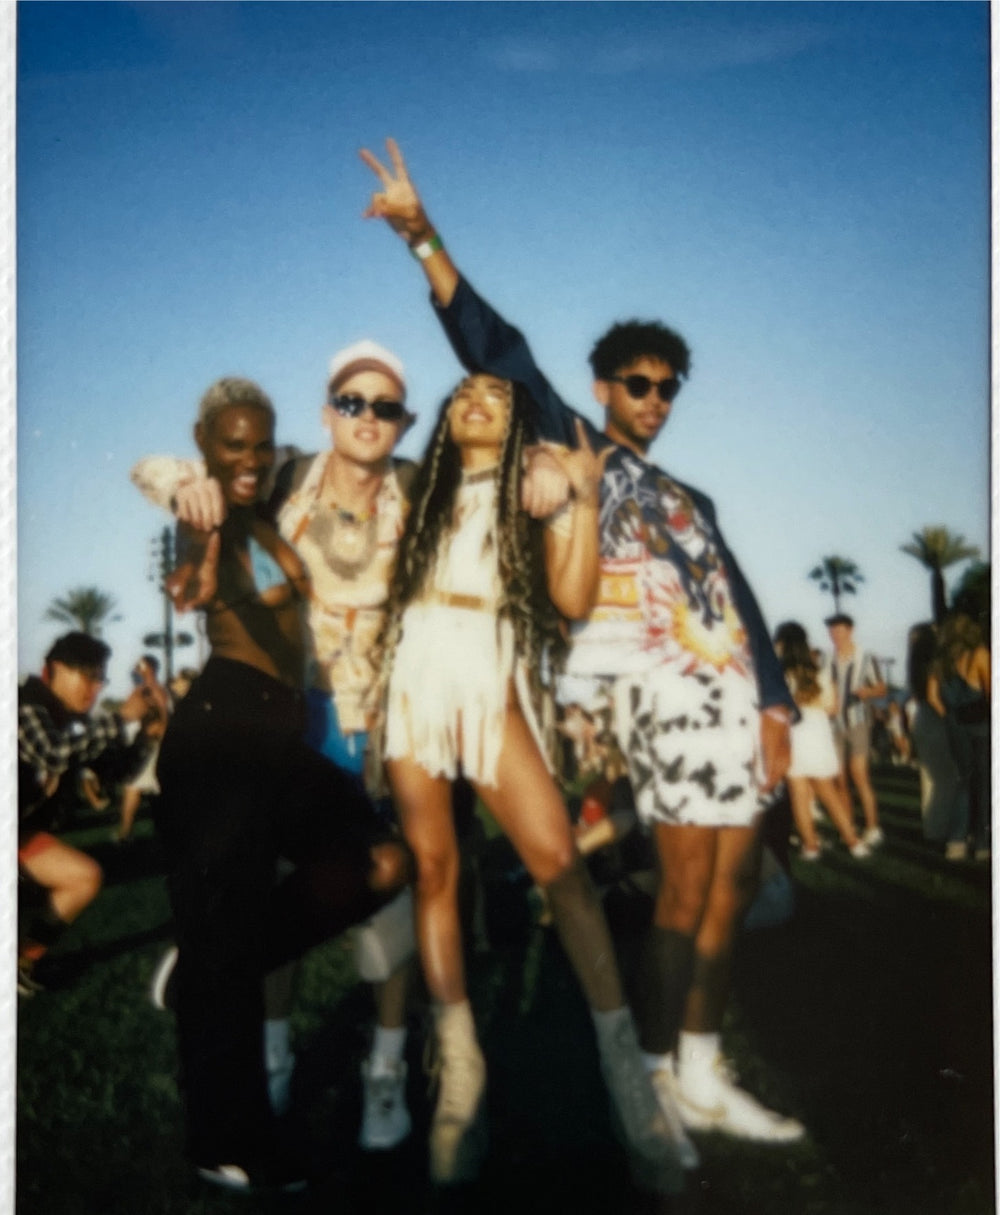 Polaroid of four young people at a festival.